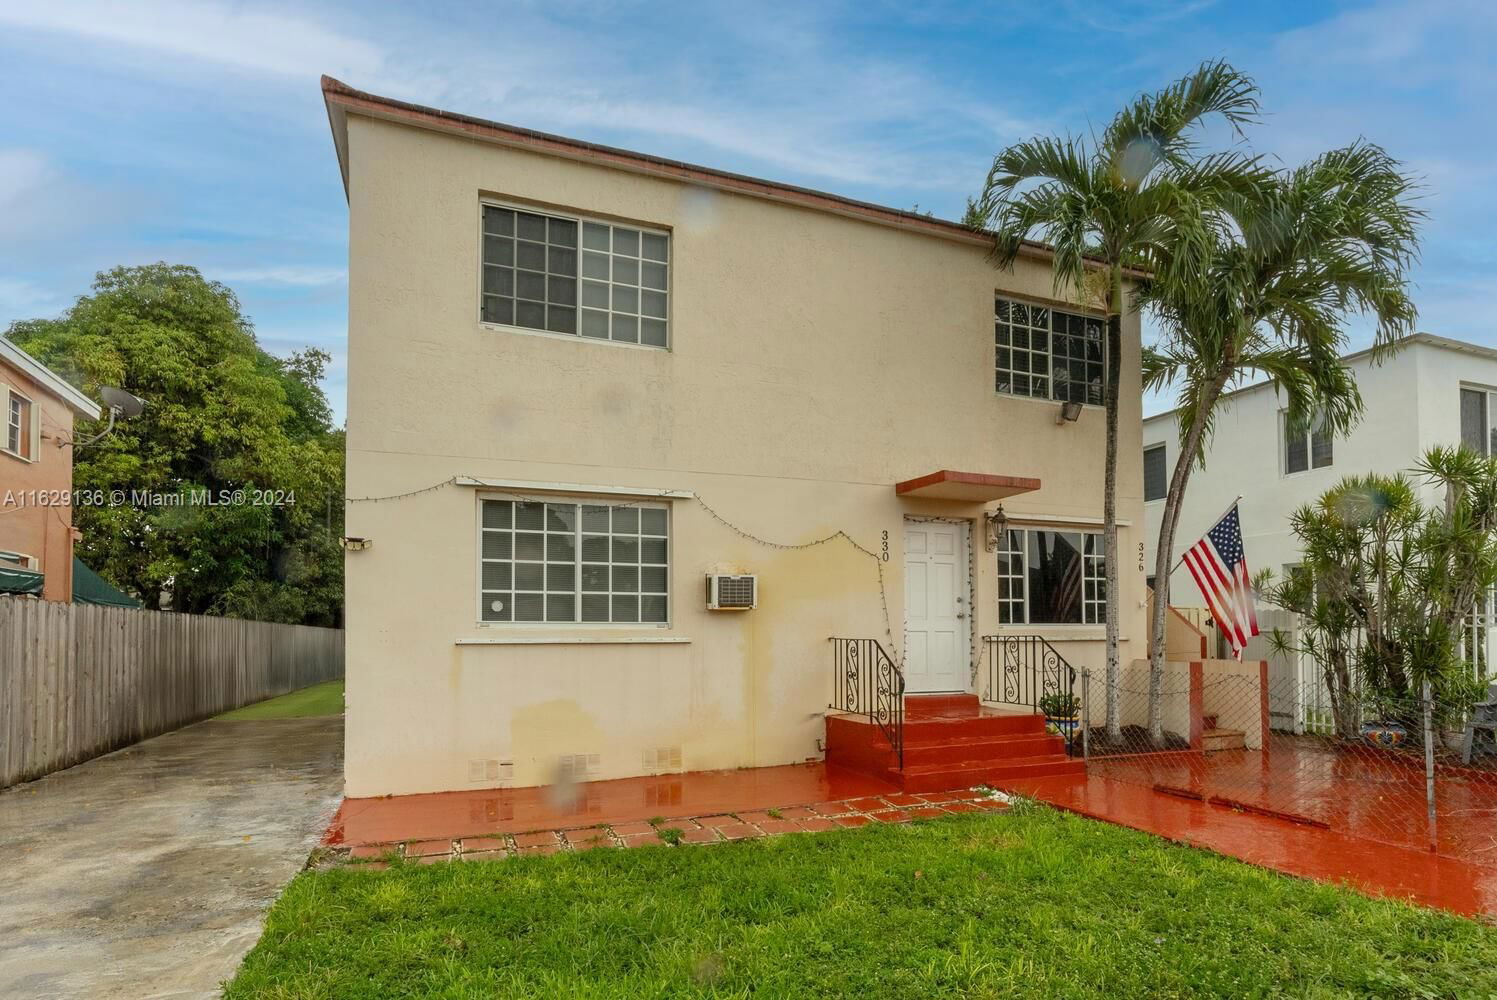 Real estate property located at 330 16th St, Miami-Dade County, TOWN OF HIALEAH 1 ADDN AM, Hialeah, FL